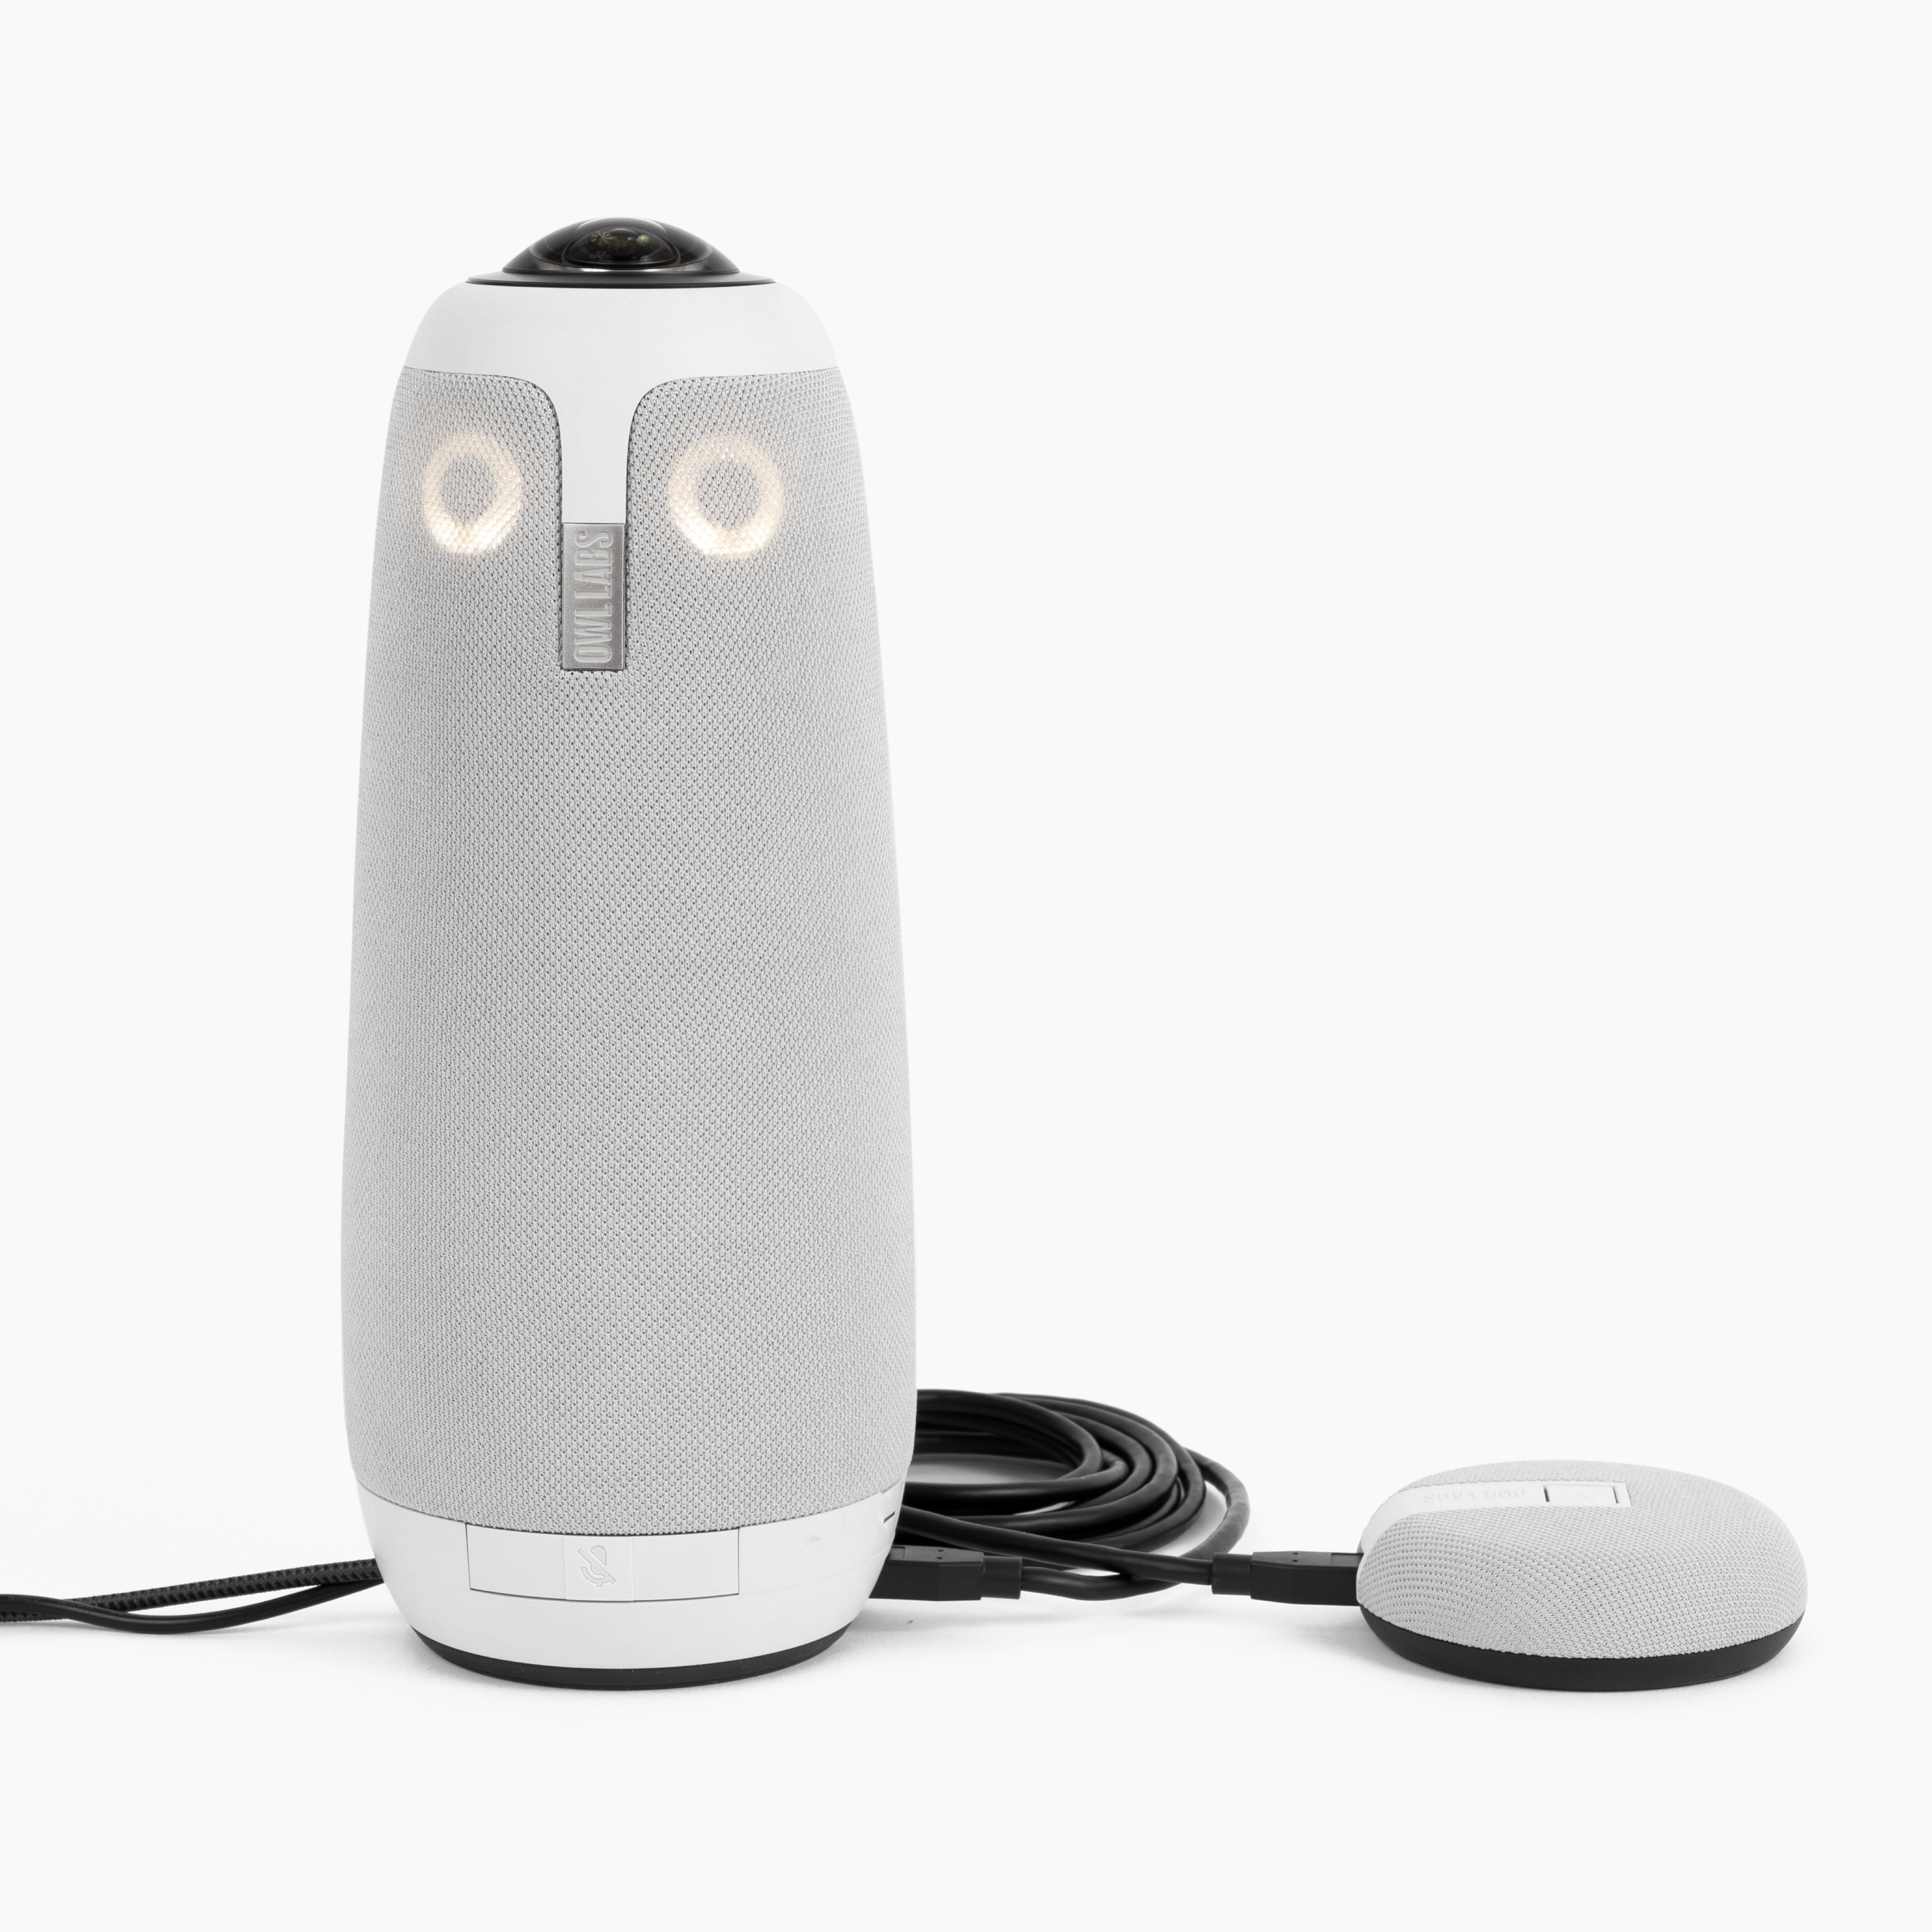 Expansion Mic: Extend your Meeting Owl 3 audio range